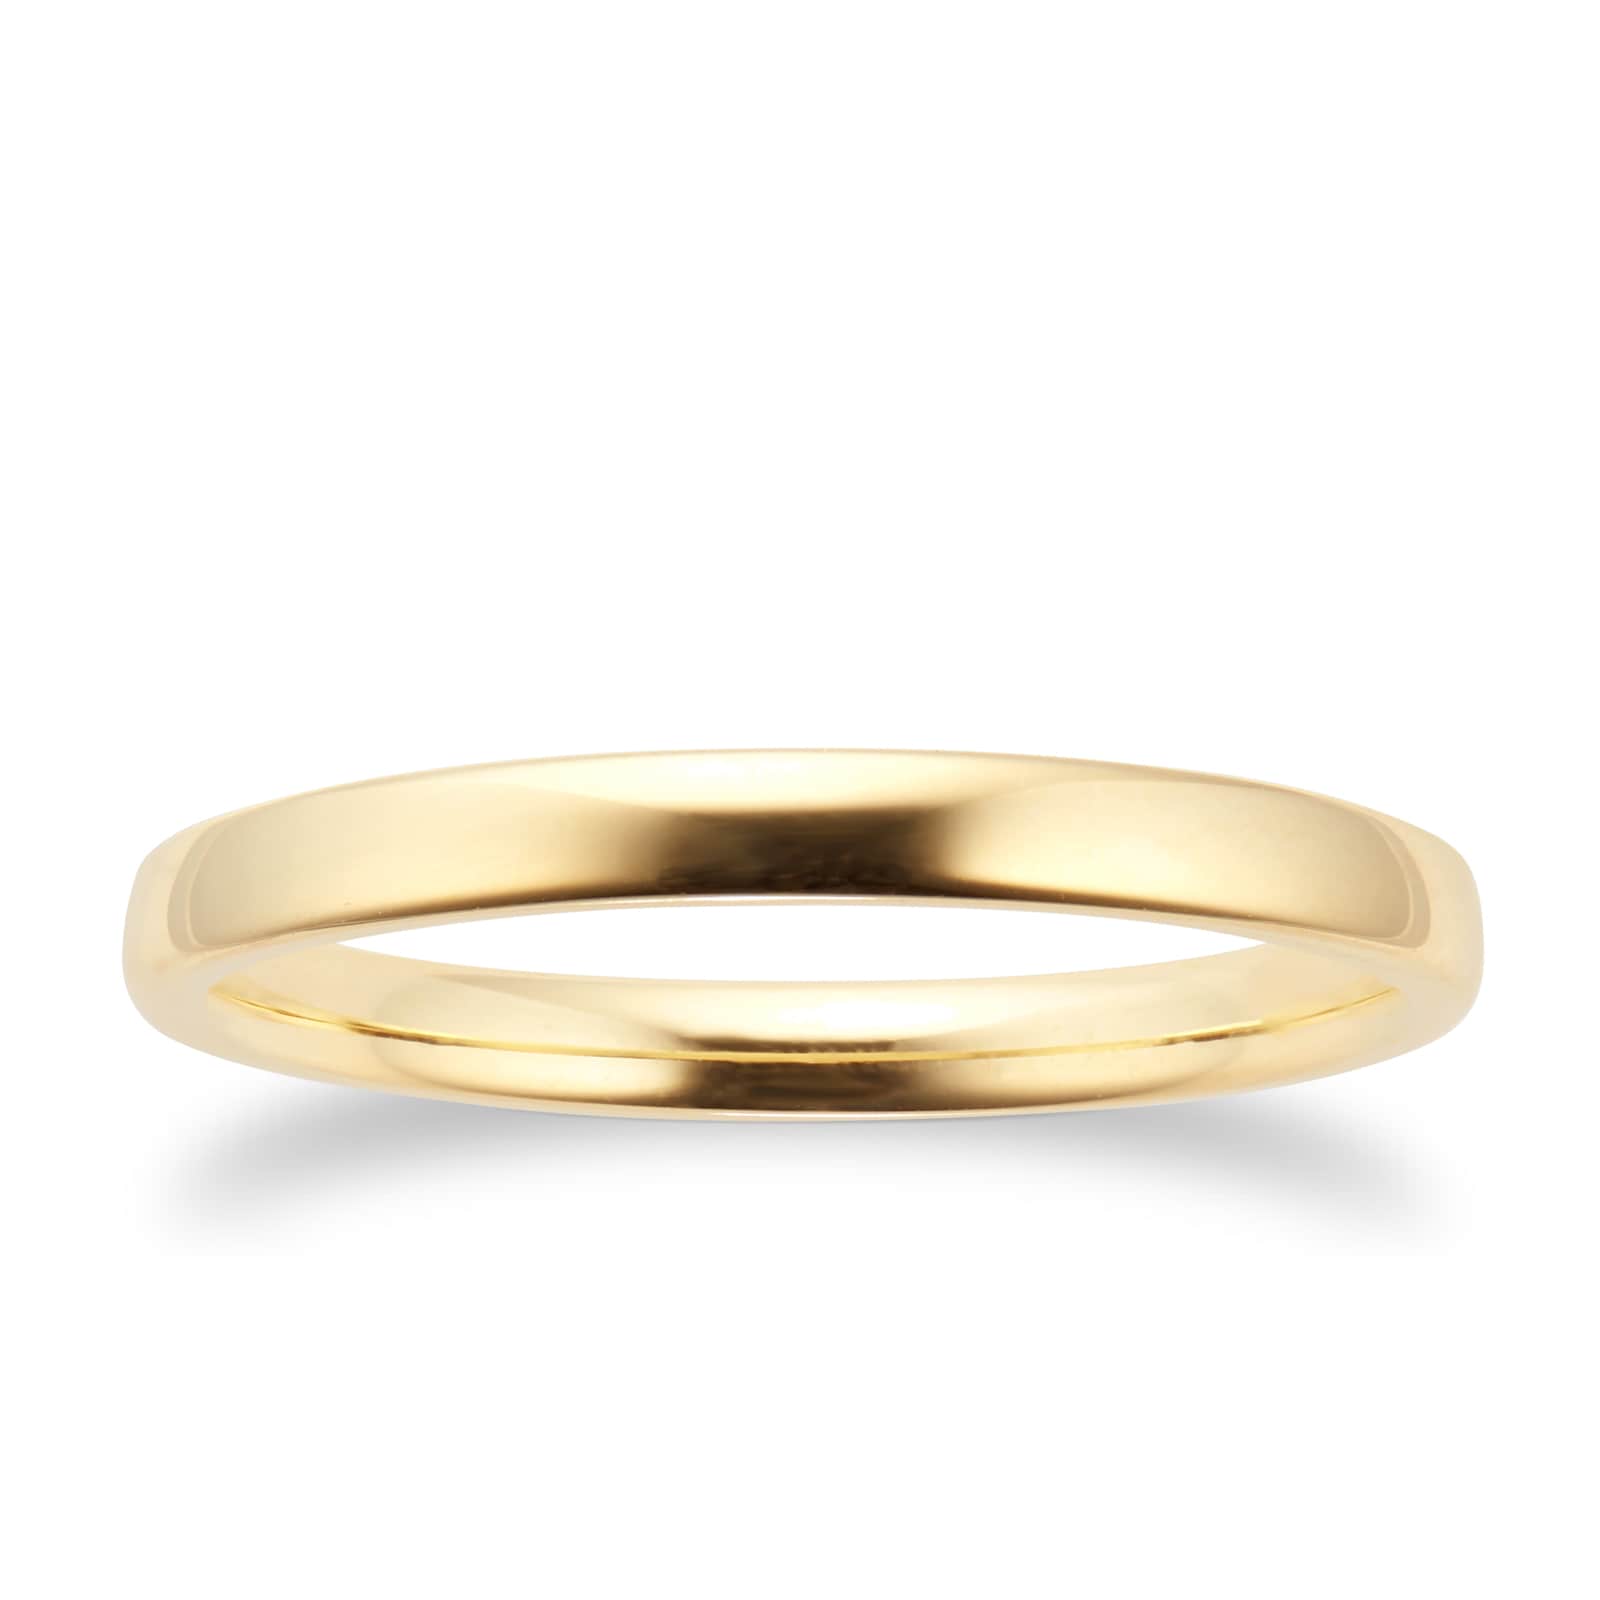 2mm Slight Court Standard Wedding Ring In 18 Carat Yellow Gold Ring Size L